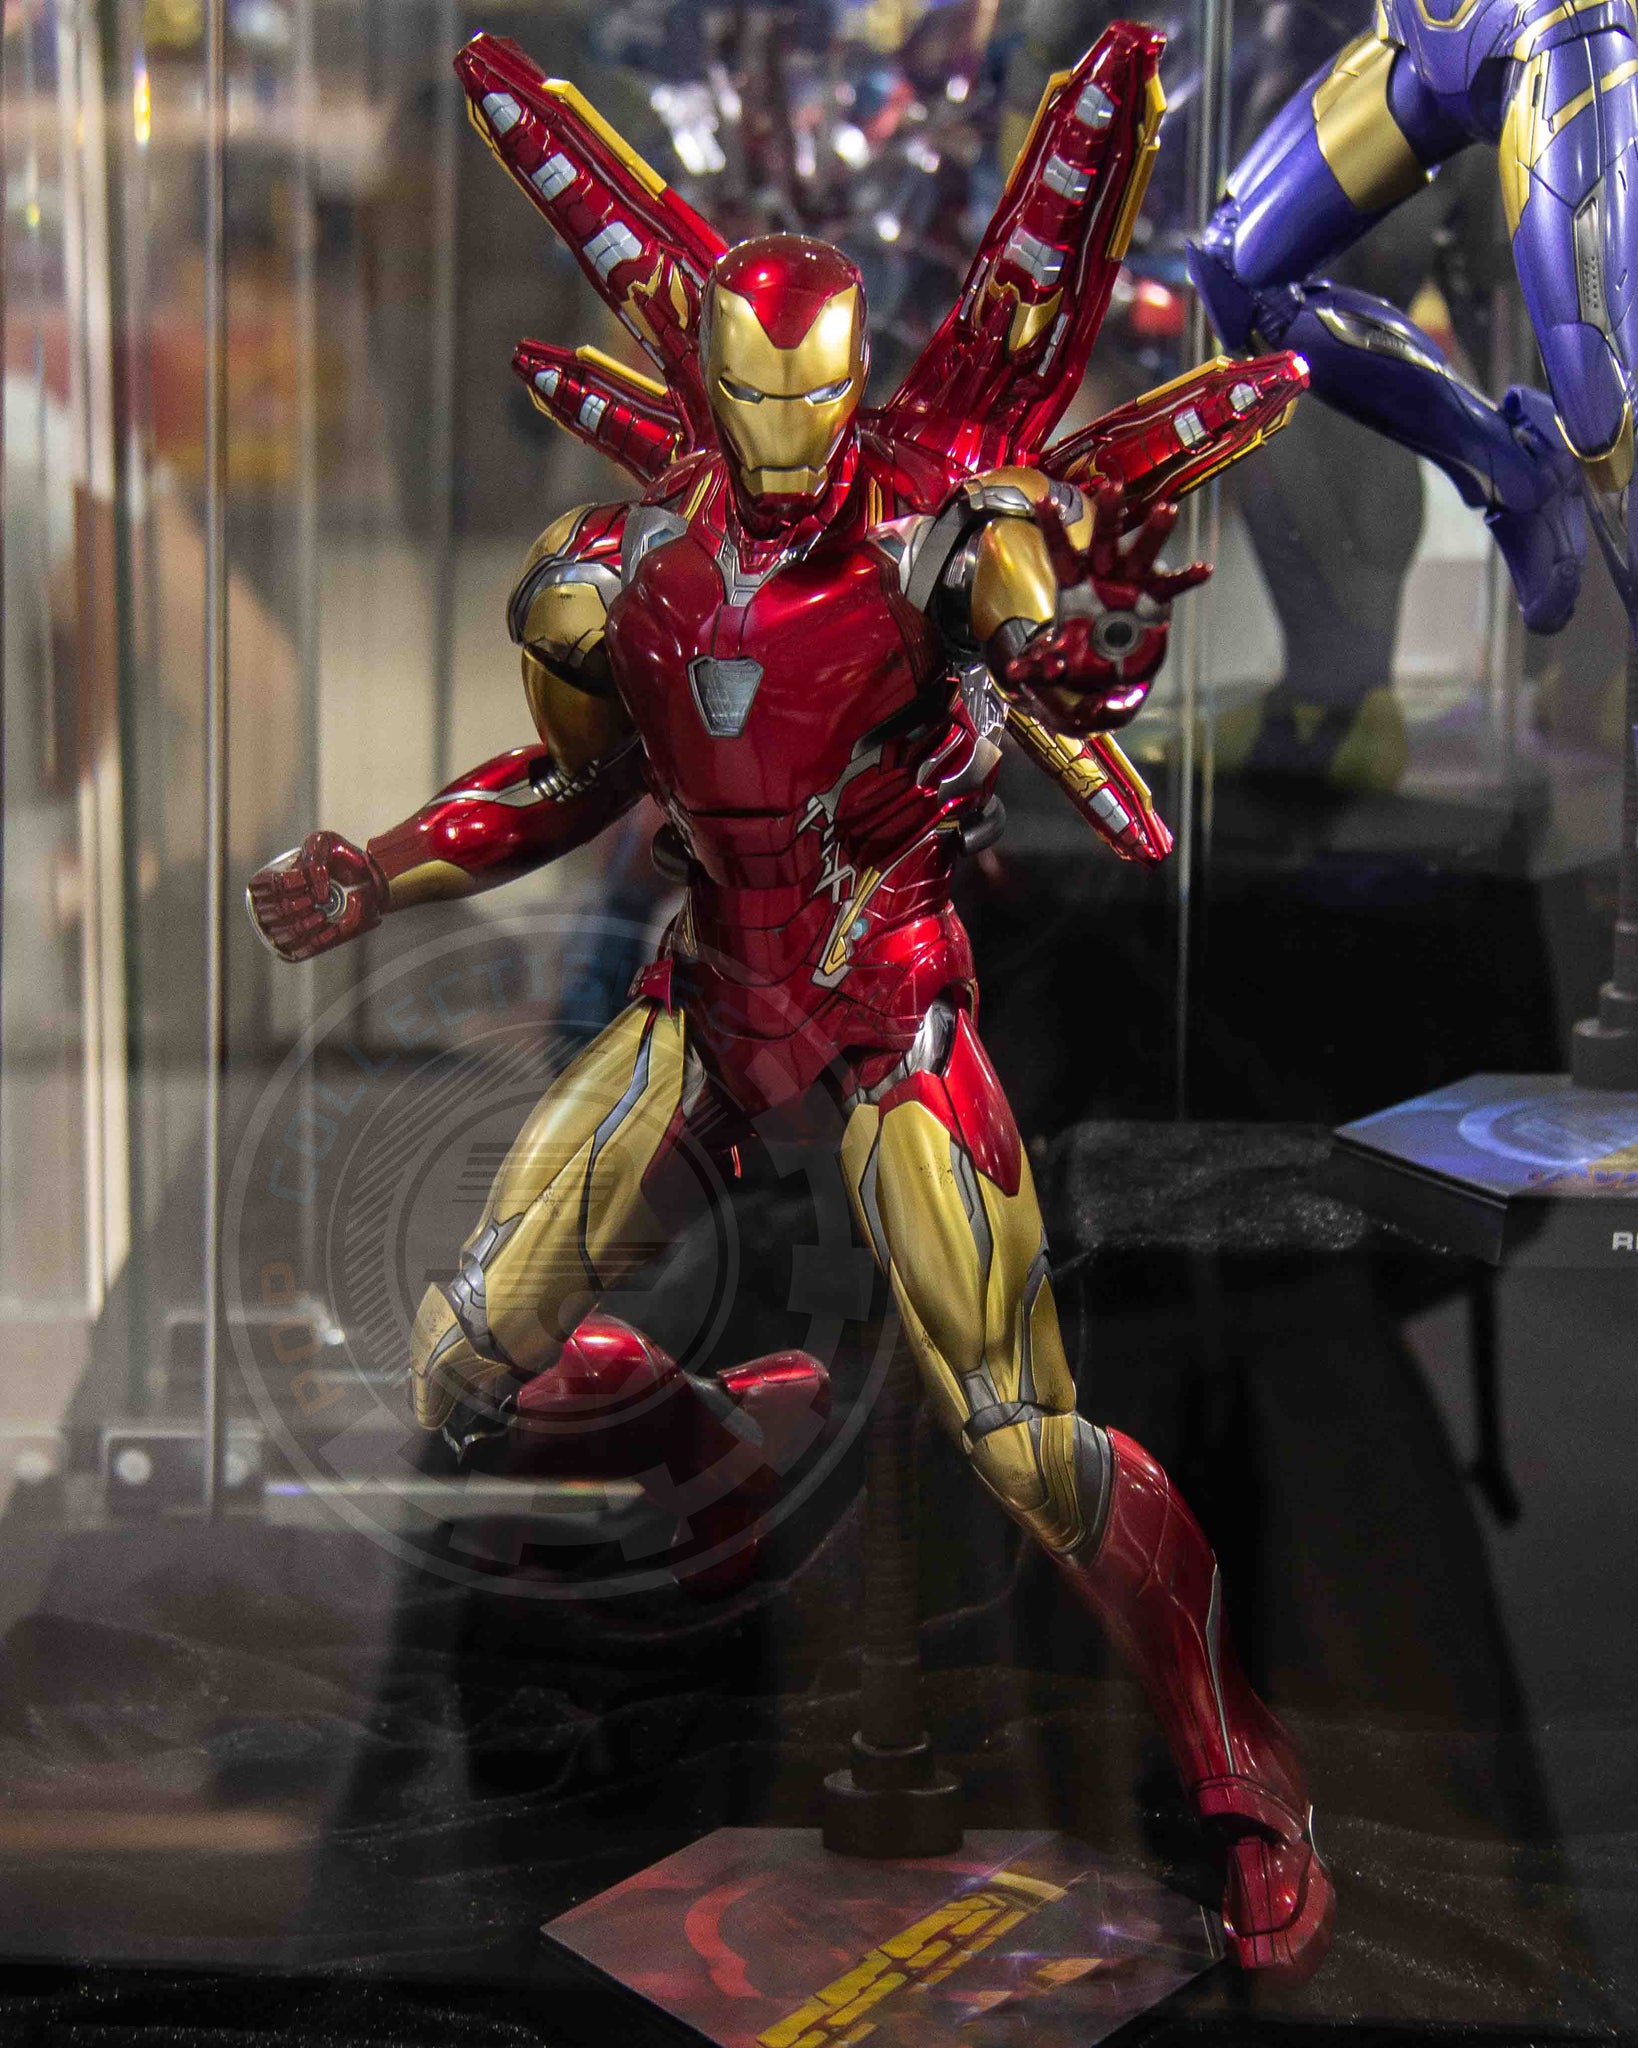 Hot toys MMS528D30 Avengers Endgame Ironman Mark 85 with Updated 